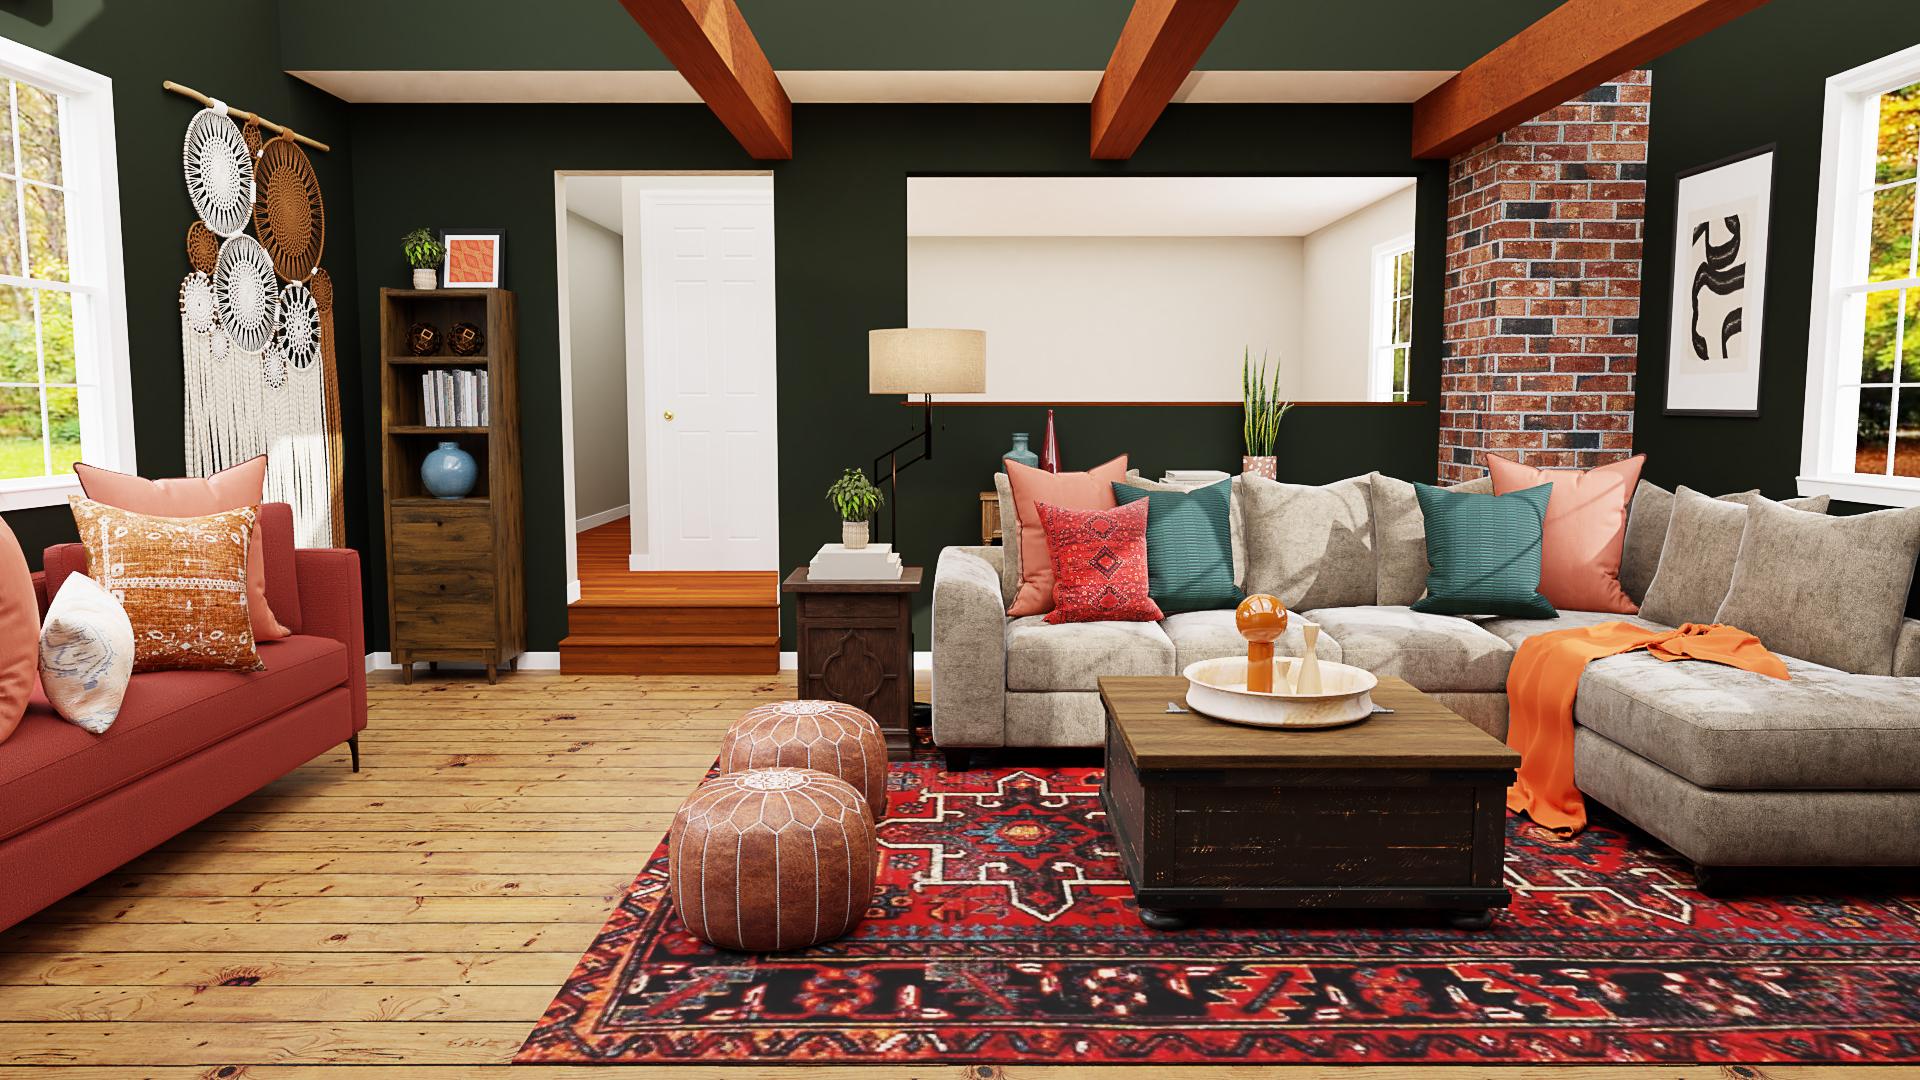 Colorful & Eclectic: A Bohemian Living Room